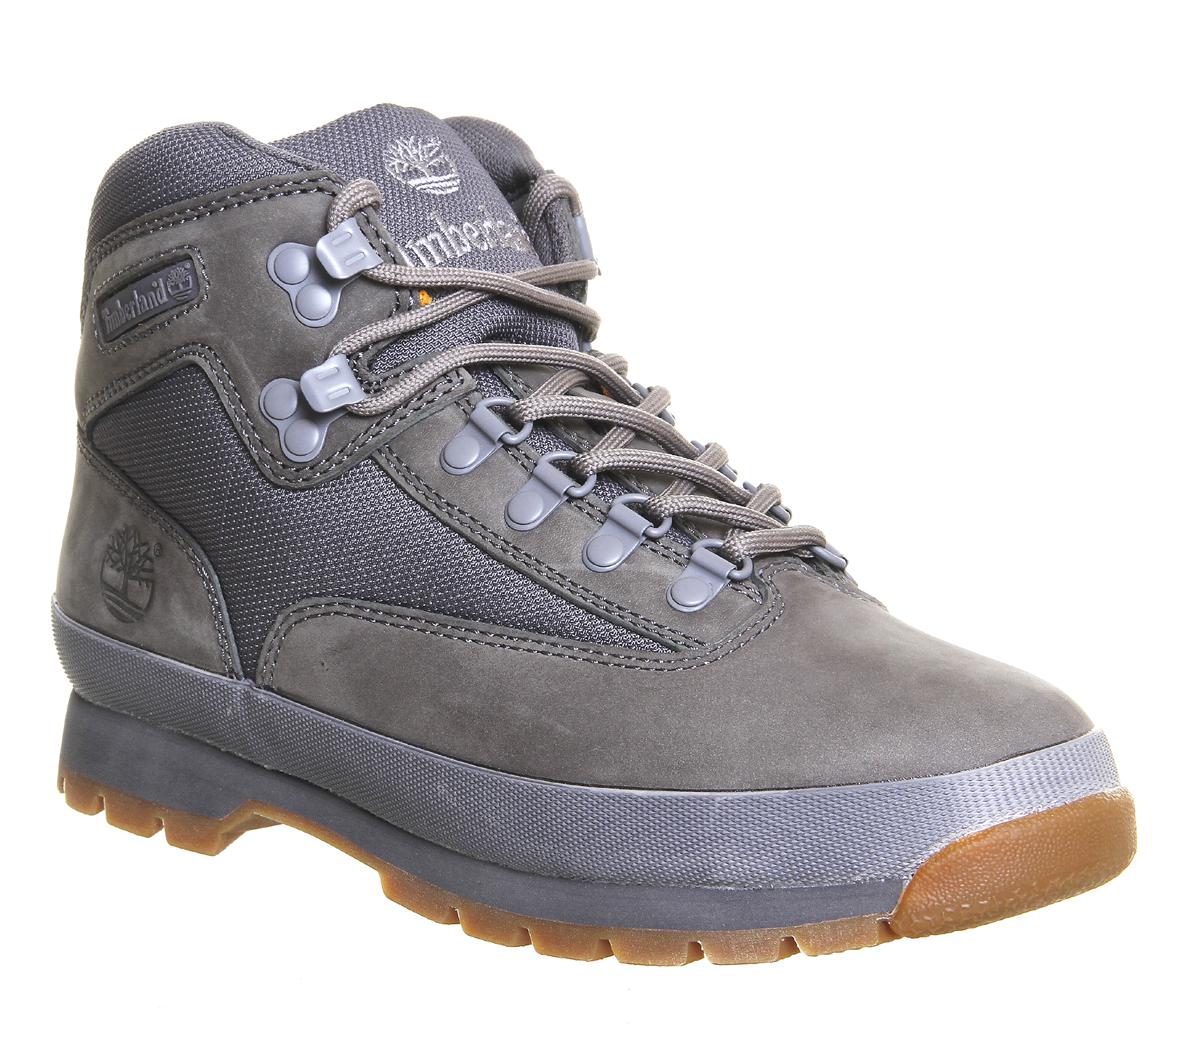 Timberland Leather Euro Hiker Boots in Grey Leather (Gray) for Men - Lyst